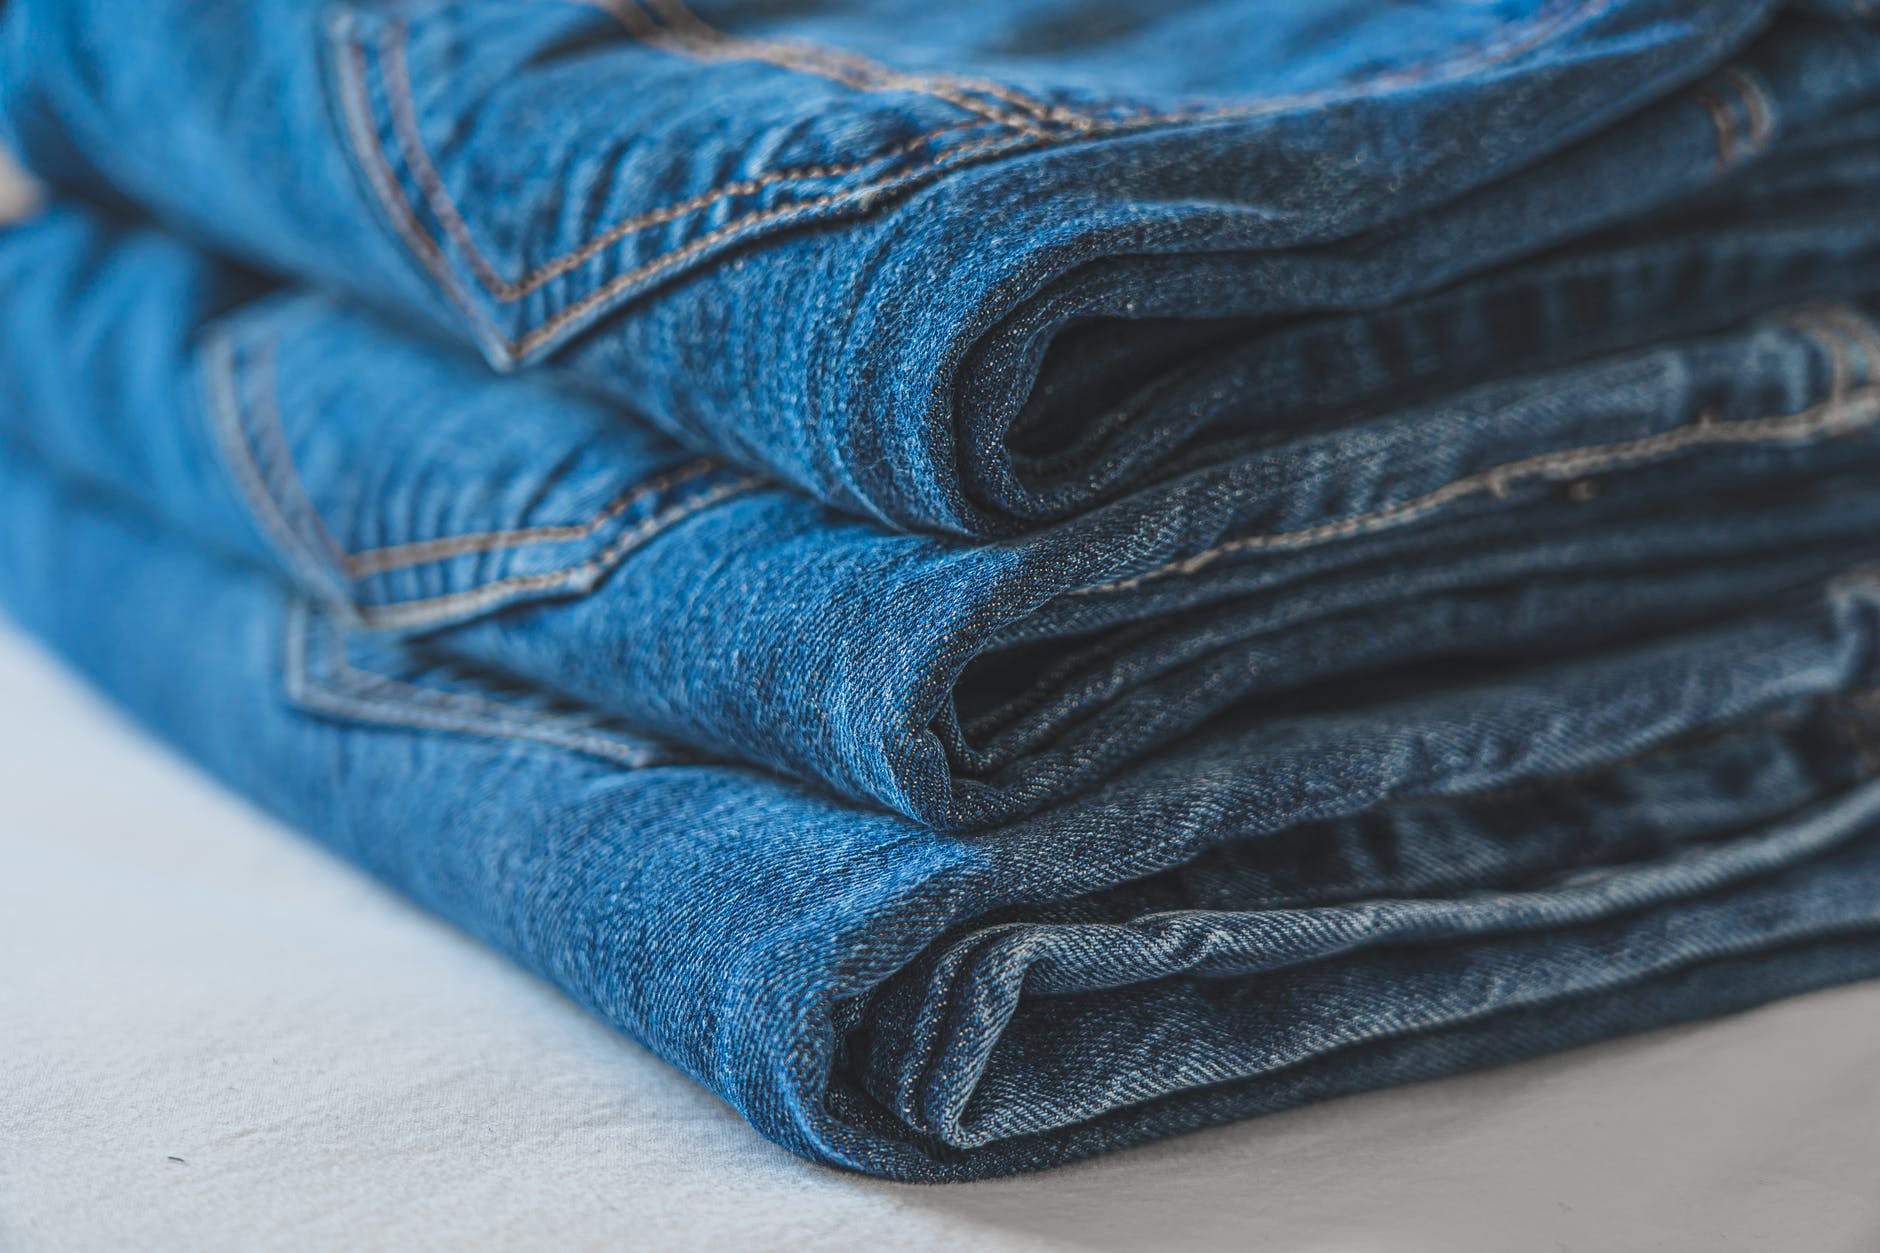 What Is The Small Pocket In Jeans For?